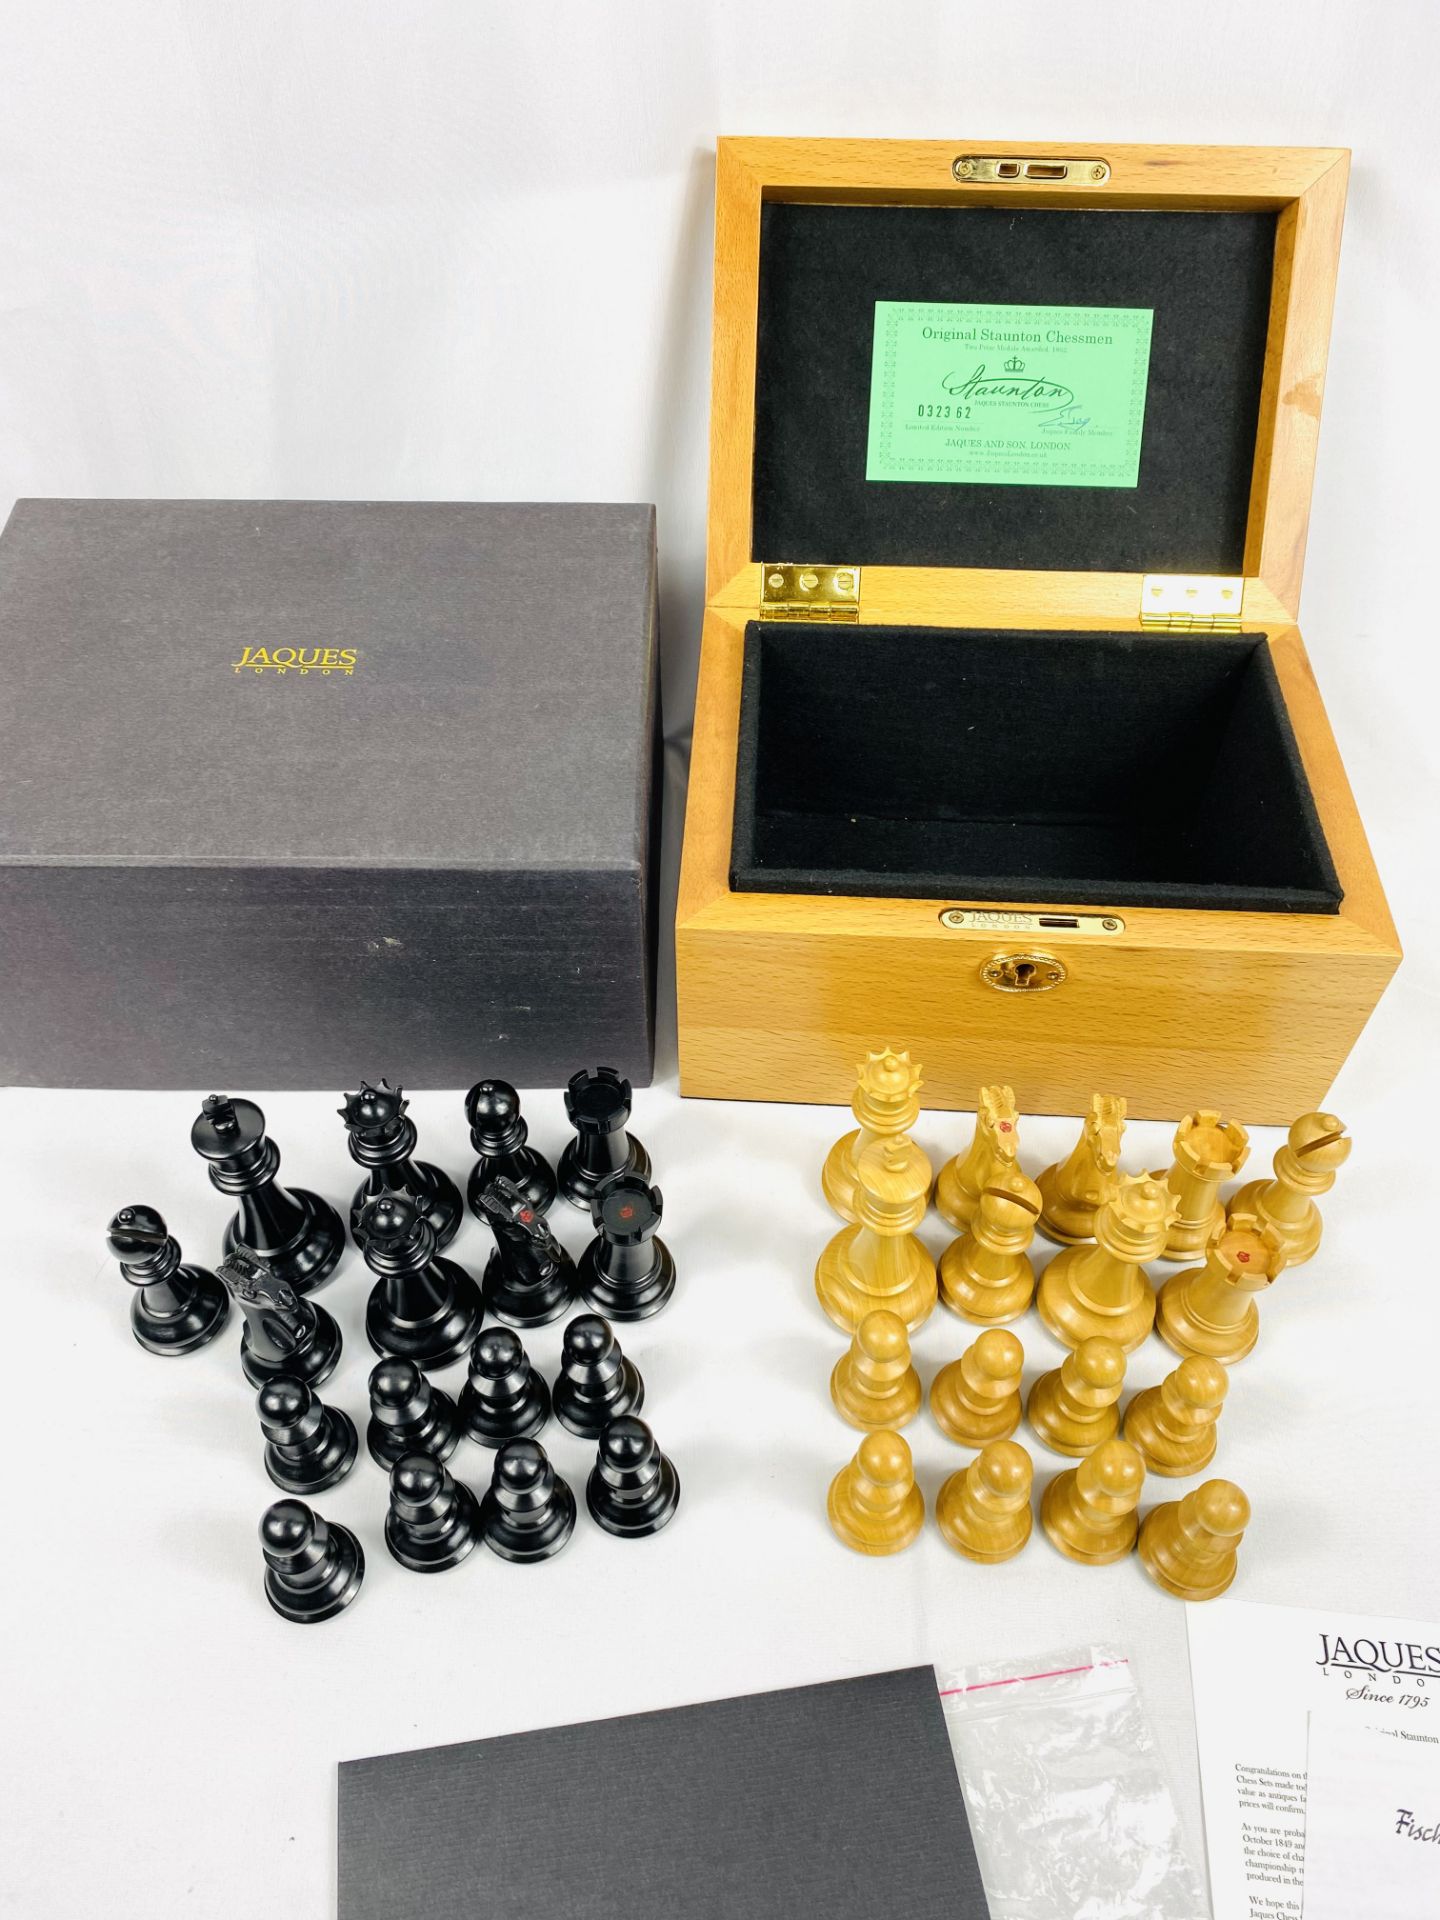 Jaques of London Staunton style chess set - Image 5 of 5